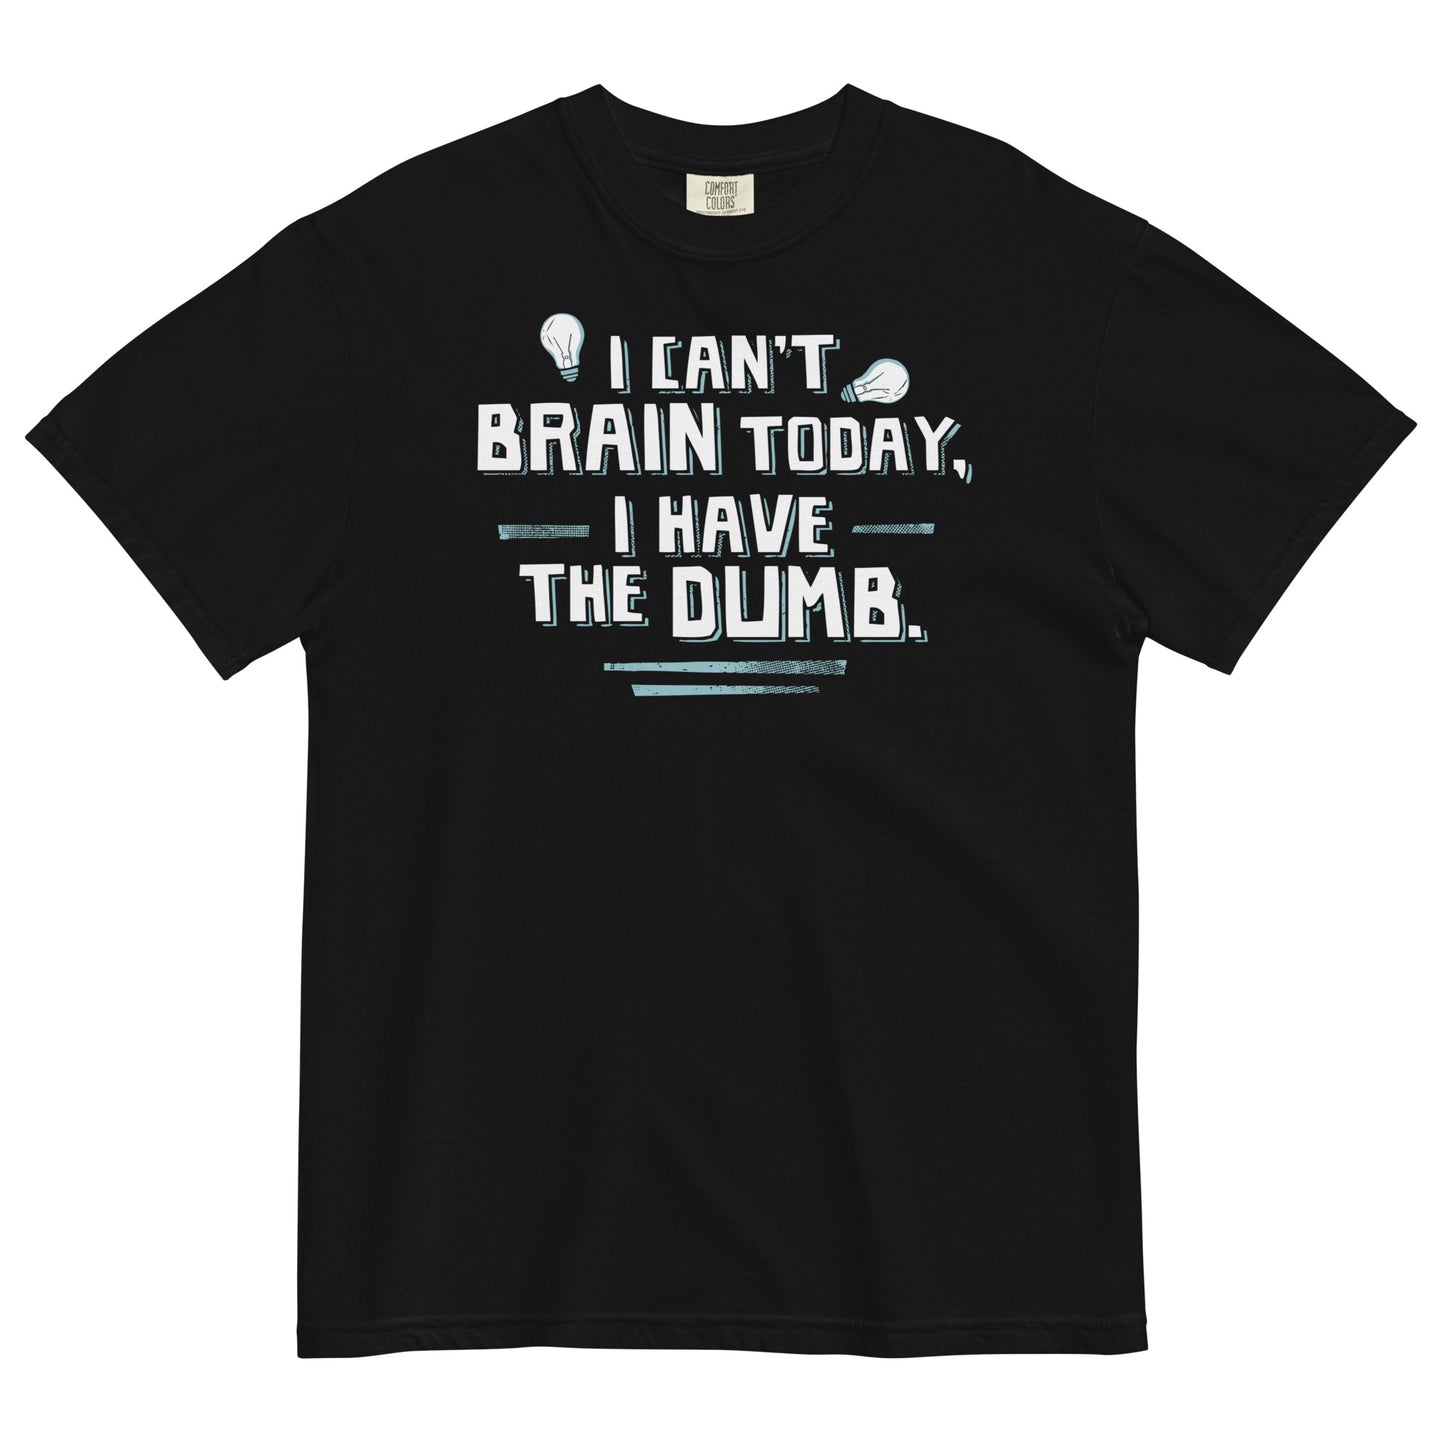 I Can't Brain Today, I Have The Dumb. Men's Relaxed Fit Tee